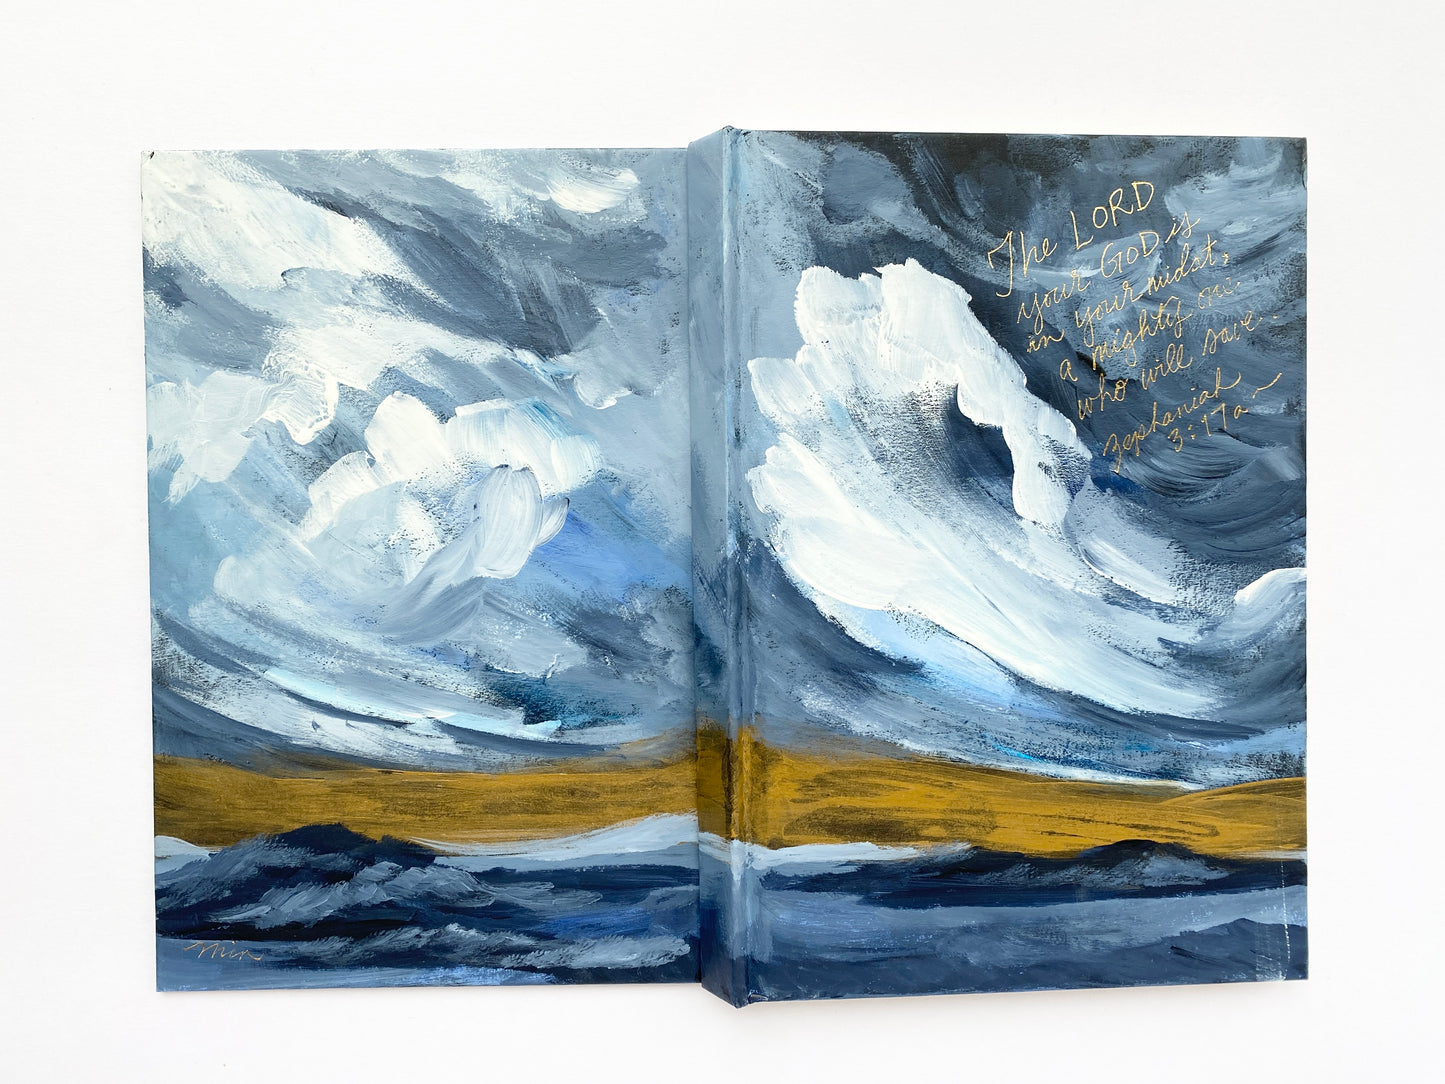 Golden Sky No.2 | Hand-painted Journal with Zephaniah3:17a